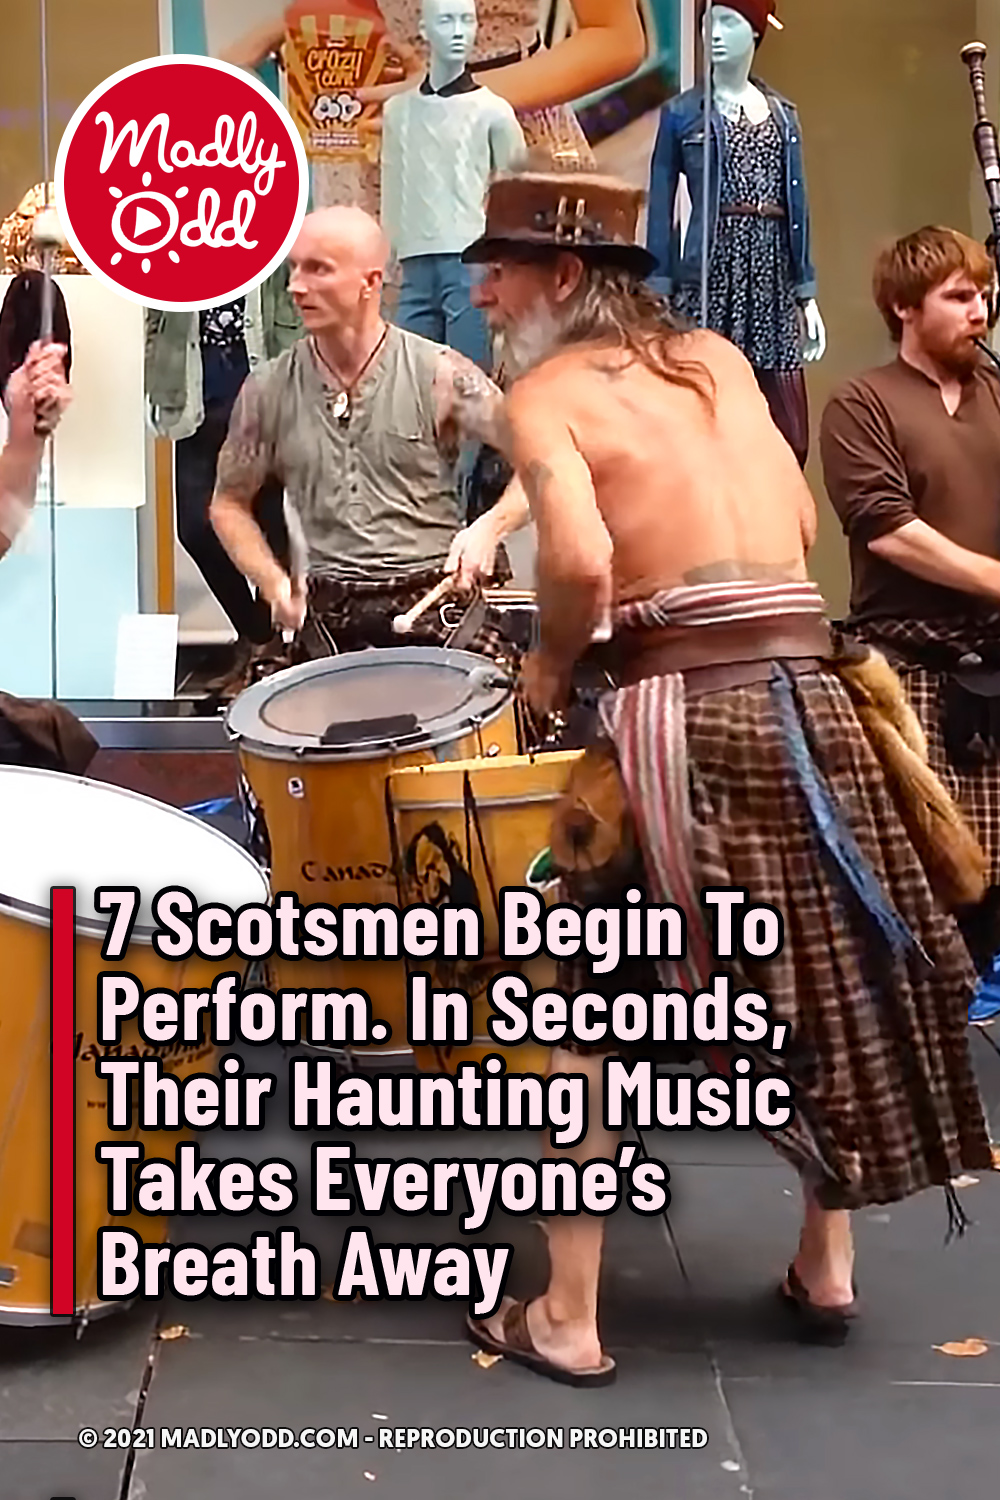 7 Scotsmen Begin To Perform. In Seconds, Their Haunting Music Takes Everyone’s Breath Away